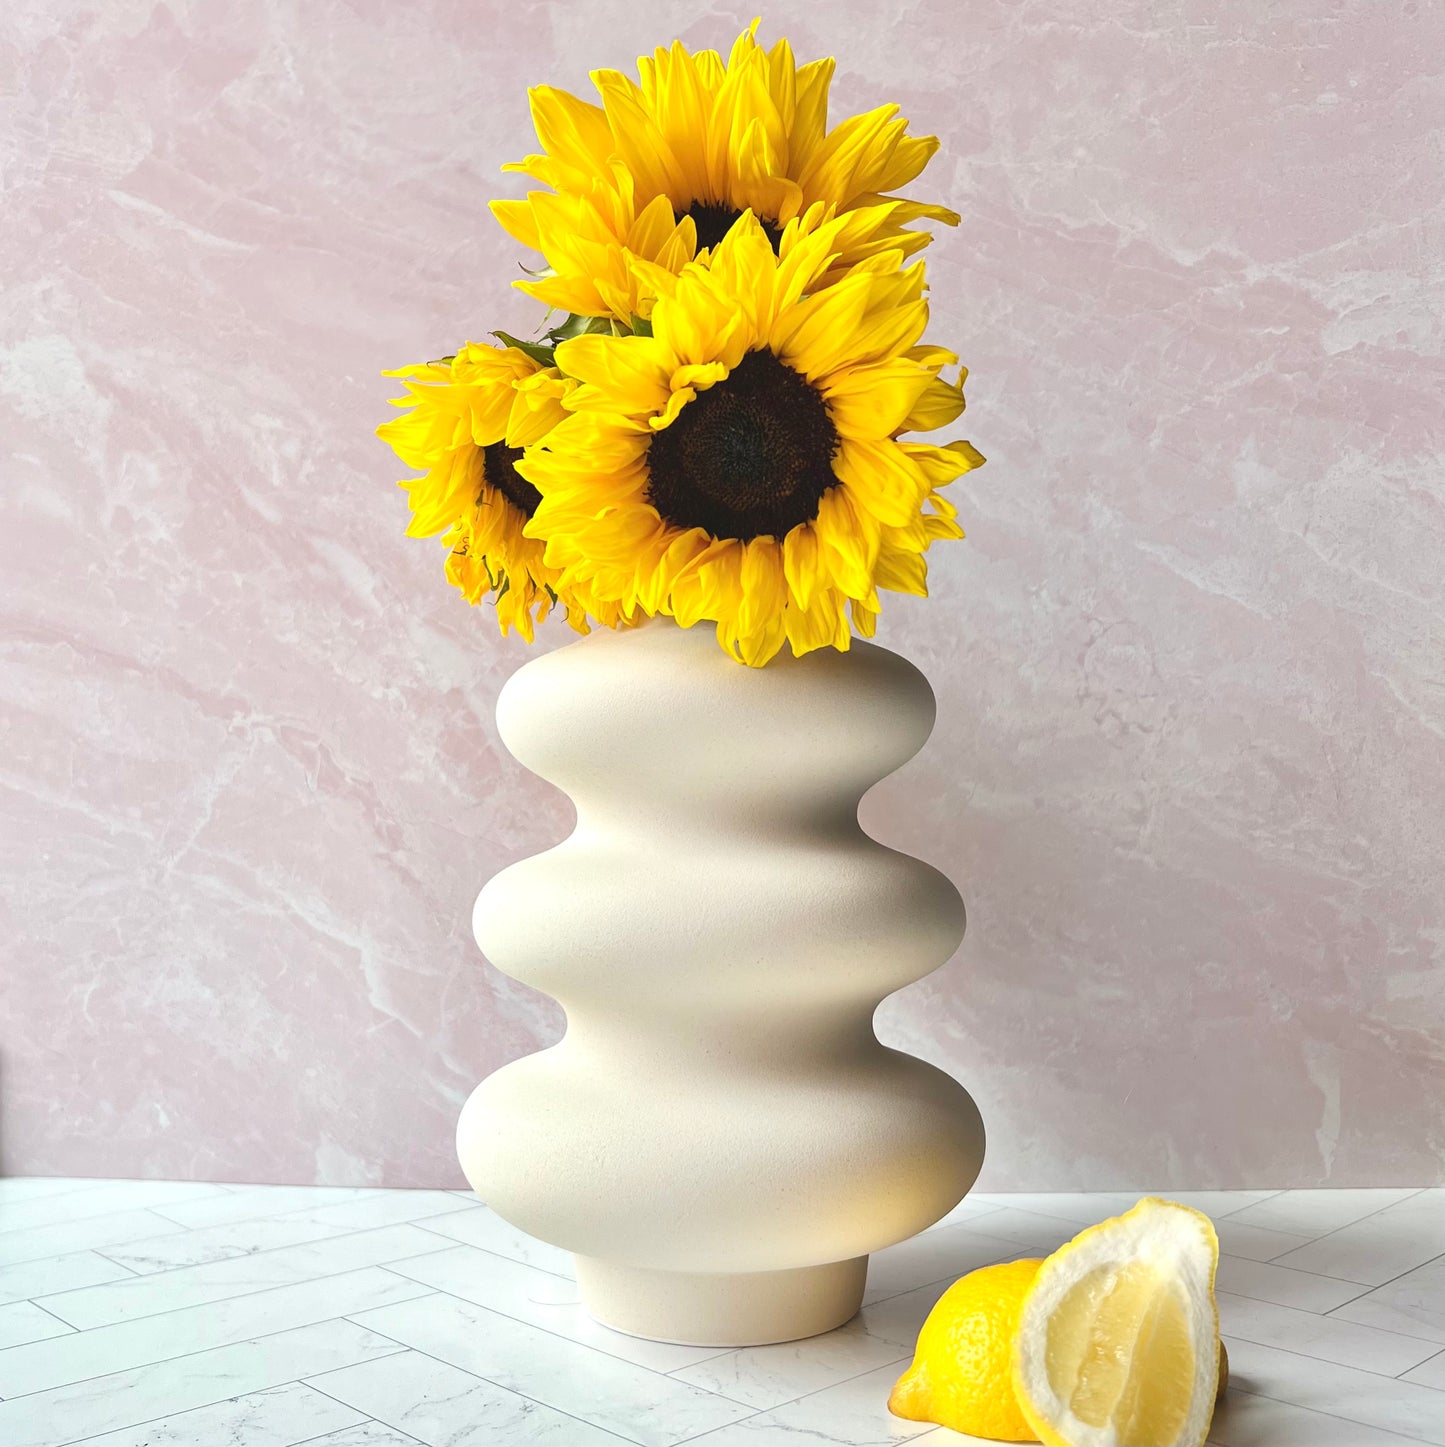 The Curvy White Vase filled with sunflowers